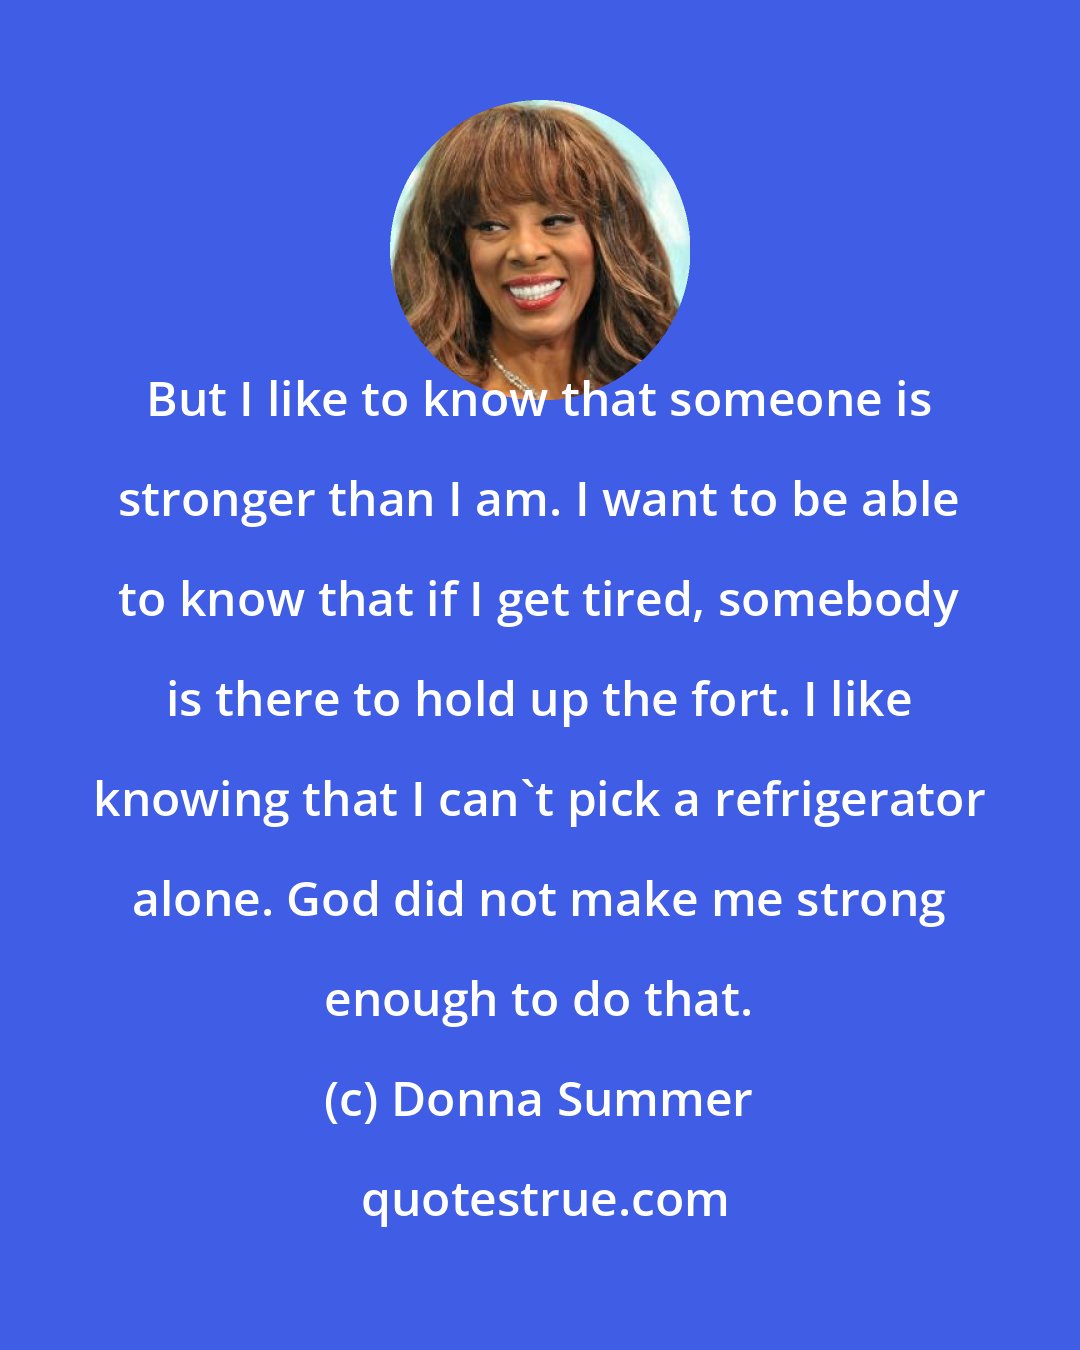 Donna Summer: But I like to know that someone is stronger than I am. I want to be able to know that if I get tired, somebody is there to hold up the fort. I like knowing that I can't pick a refrigerator alone. God did not make me strong enough to do that.